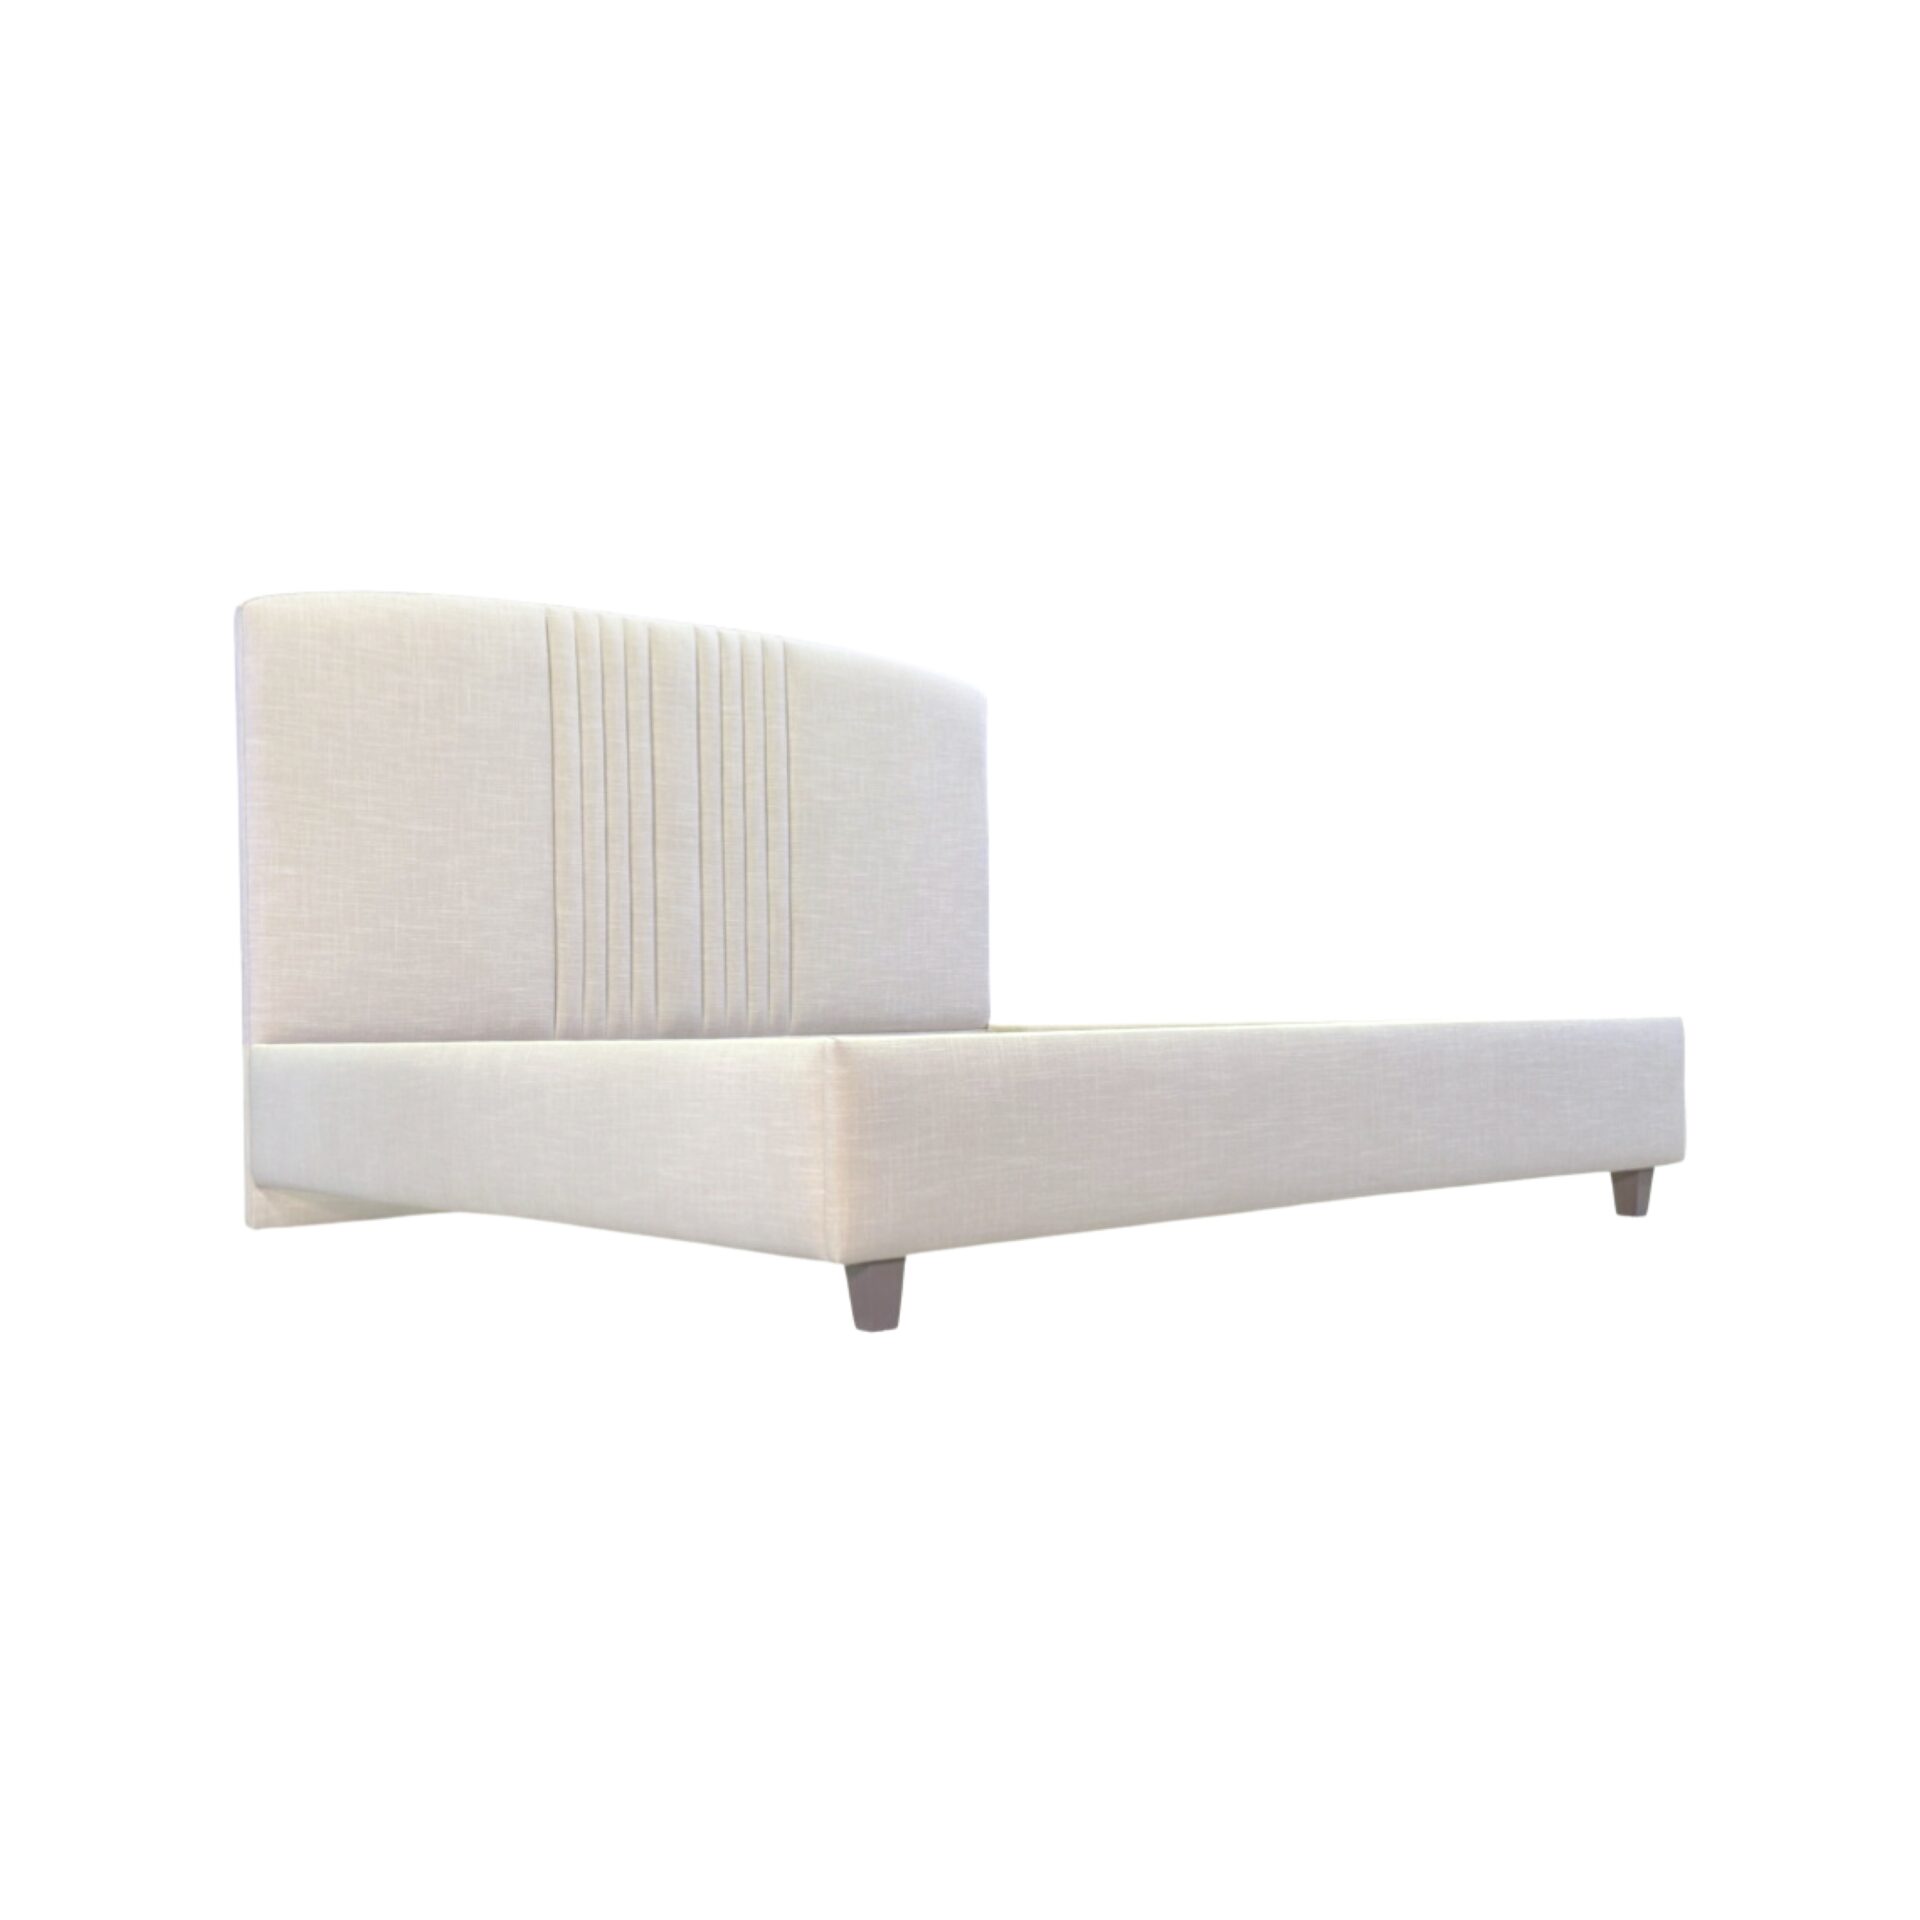 BETSY-freestanding-upholstered-headboard-bed-luxury-furniture-blend-home-furnishings